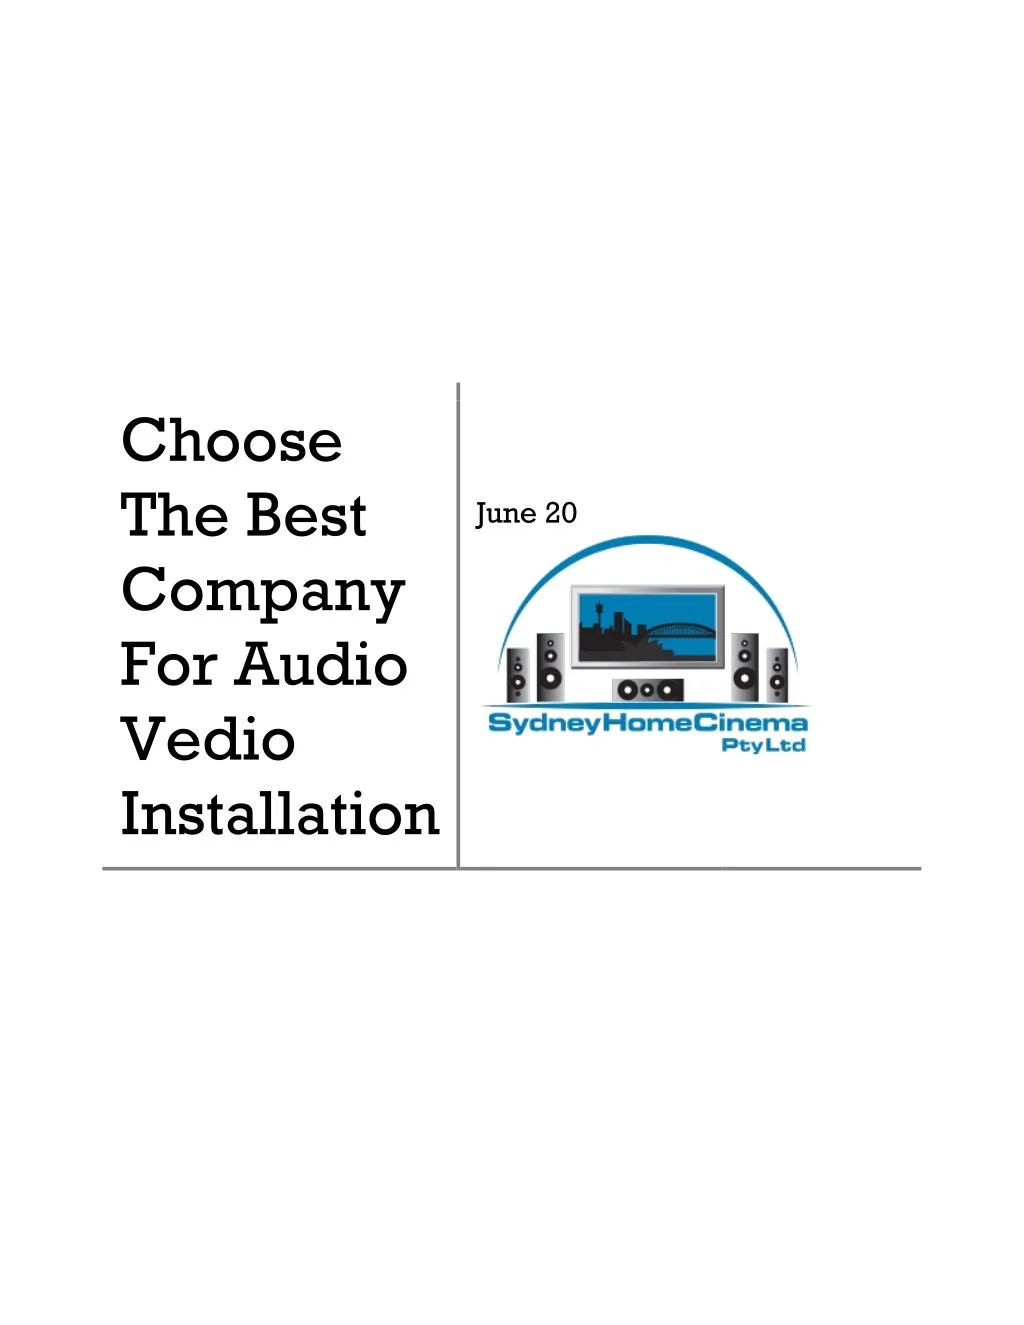 choose the best company for audio vedio